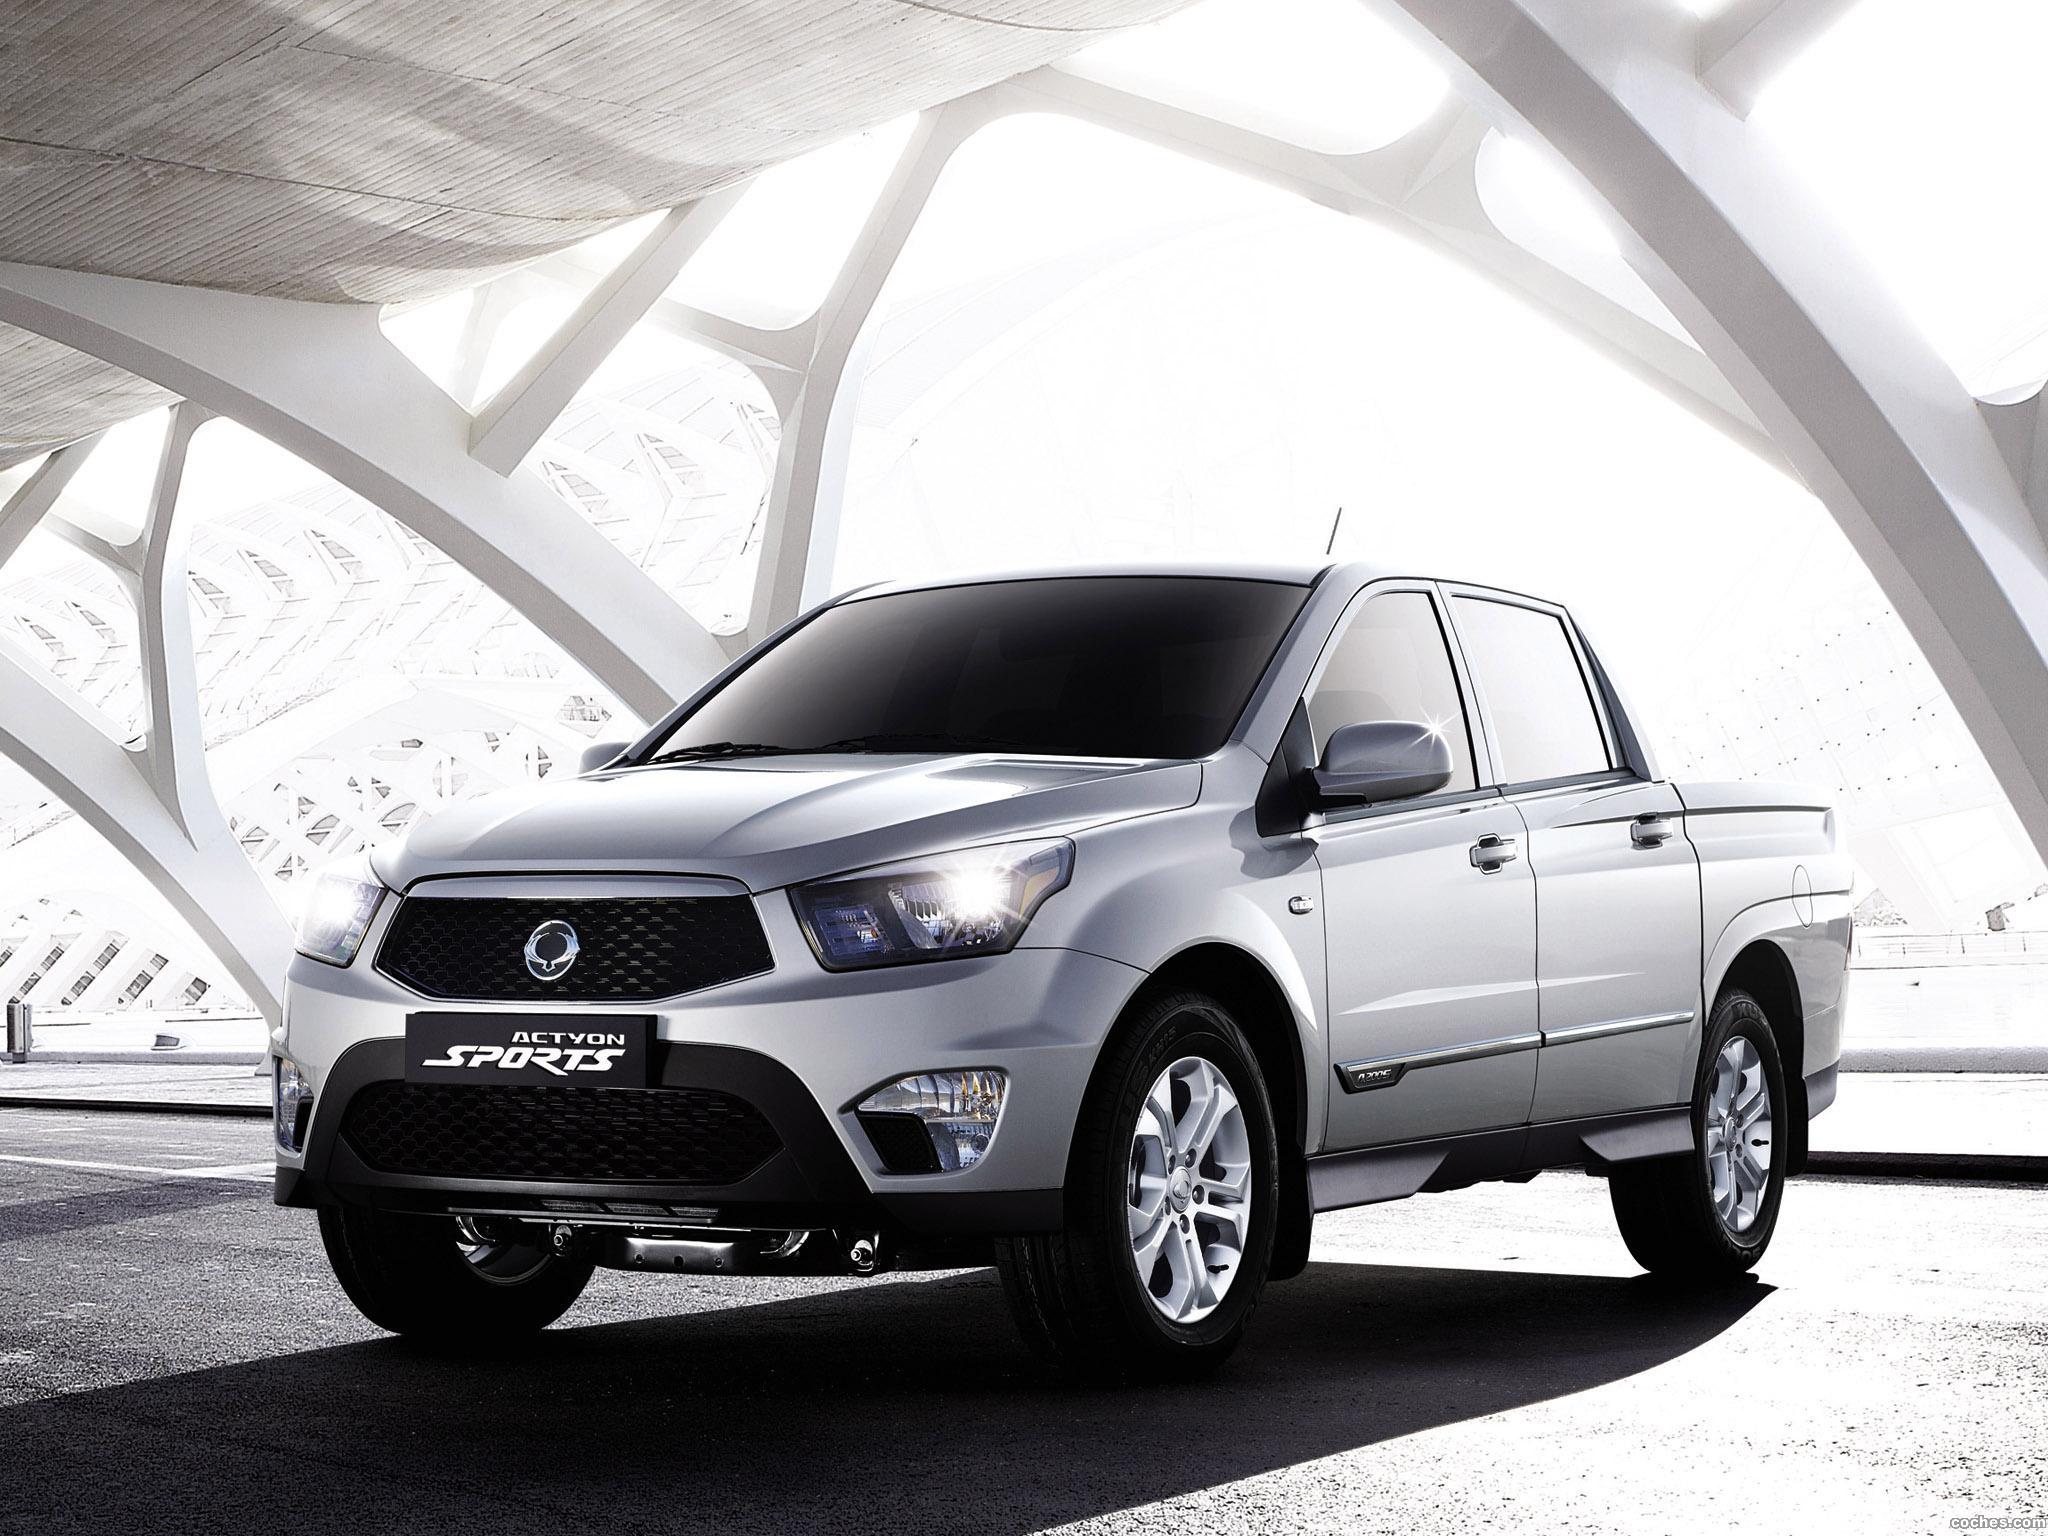 ssangyong_actyon-sports-2012_r5